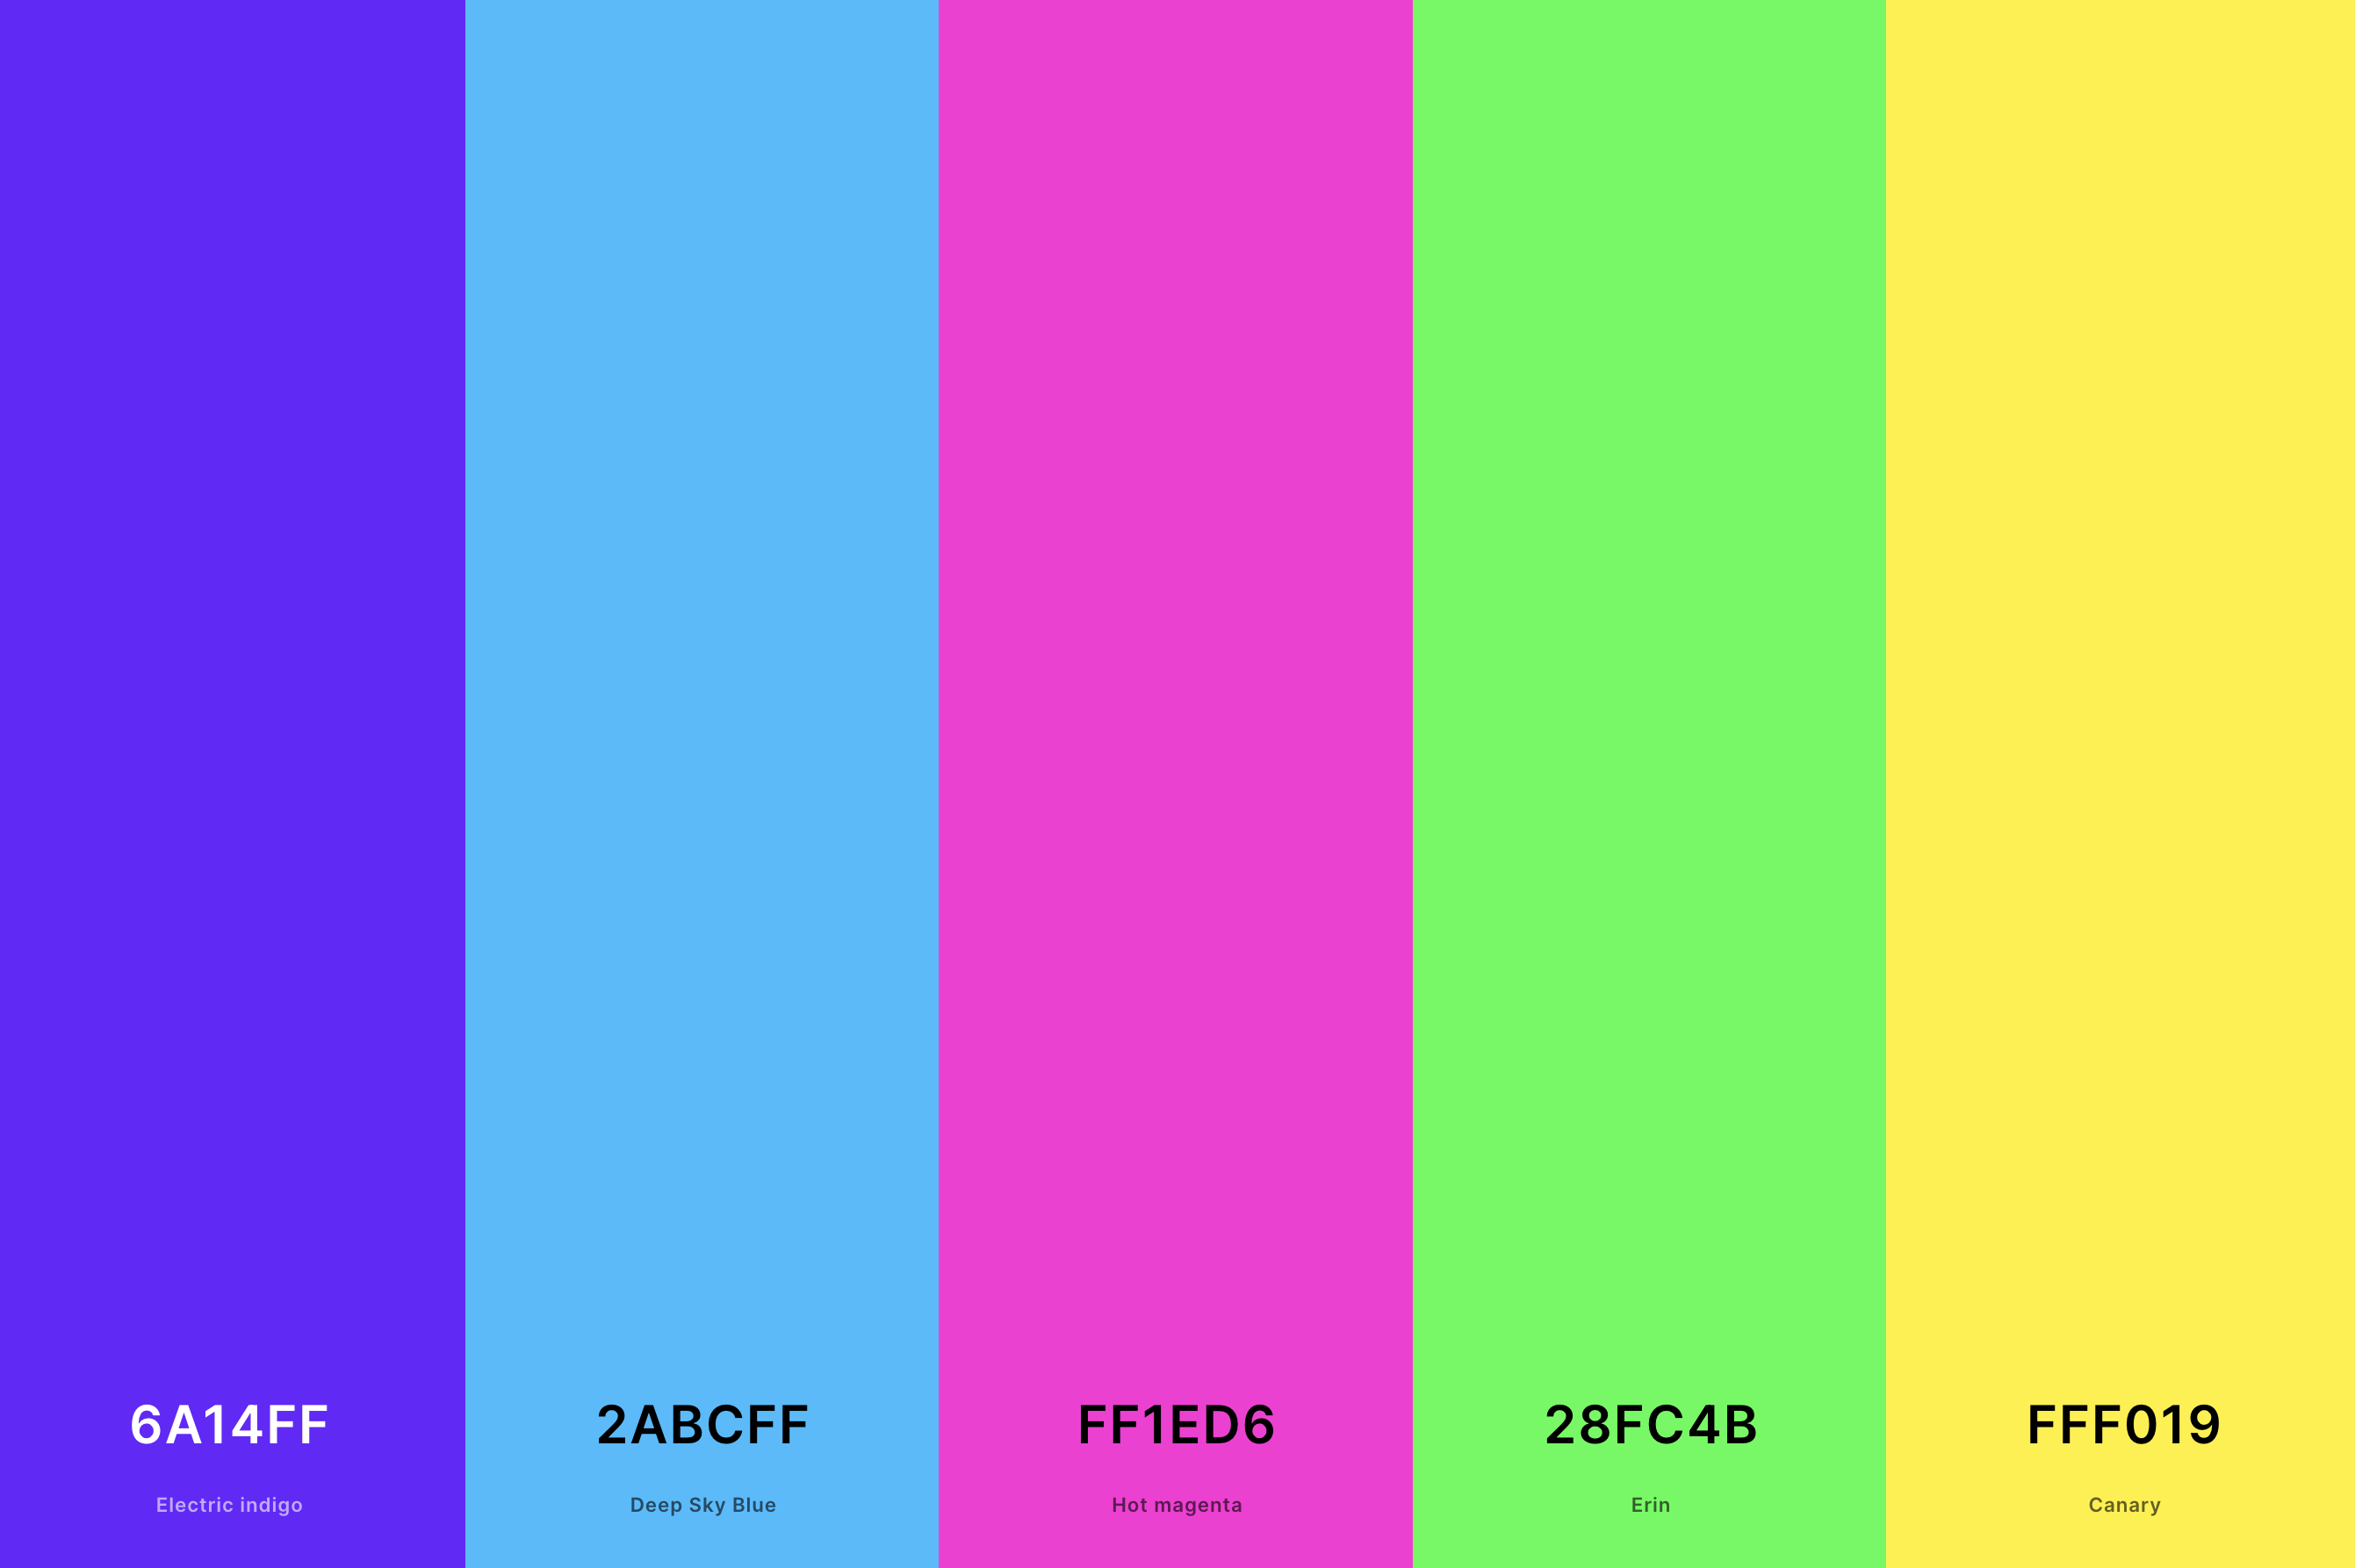 10. Bright Neon Color Palette Color Palette with Electric Indigo (Hex #6A14FF) + Deep Sky Blue (Hex #2ABCFF) + Hot Magenta (Hex #FF1ED6) + Erin (Hex #28FC4B) + Canary (Hex #FFF019) Color Palette with Hex Codes